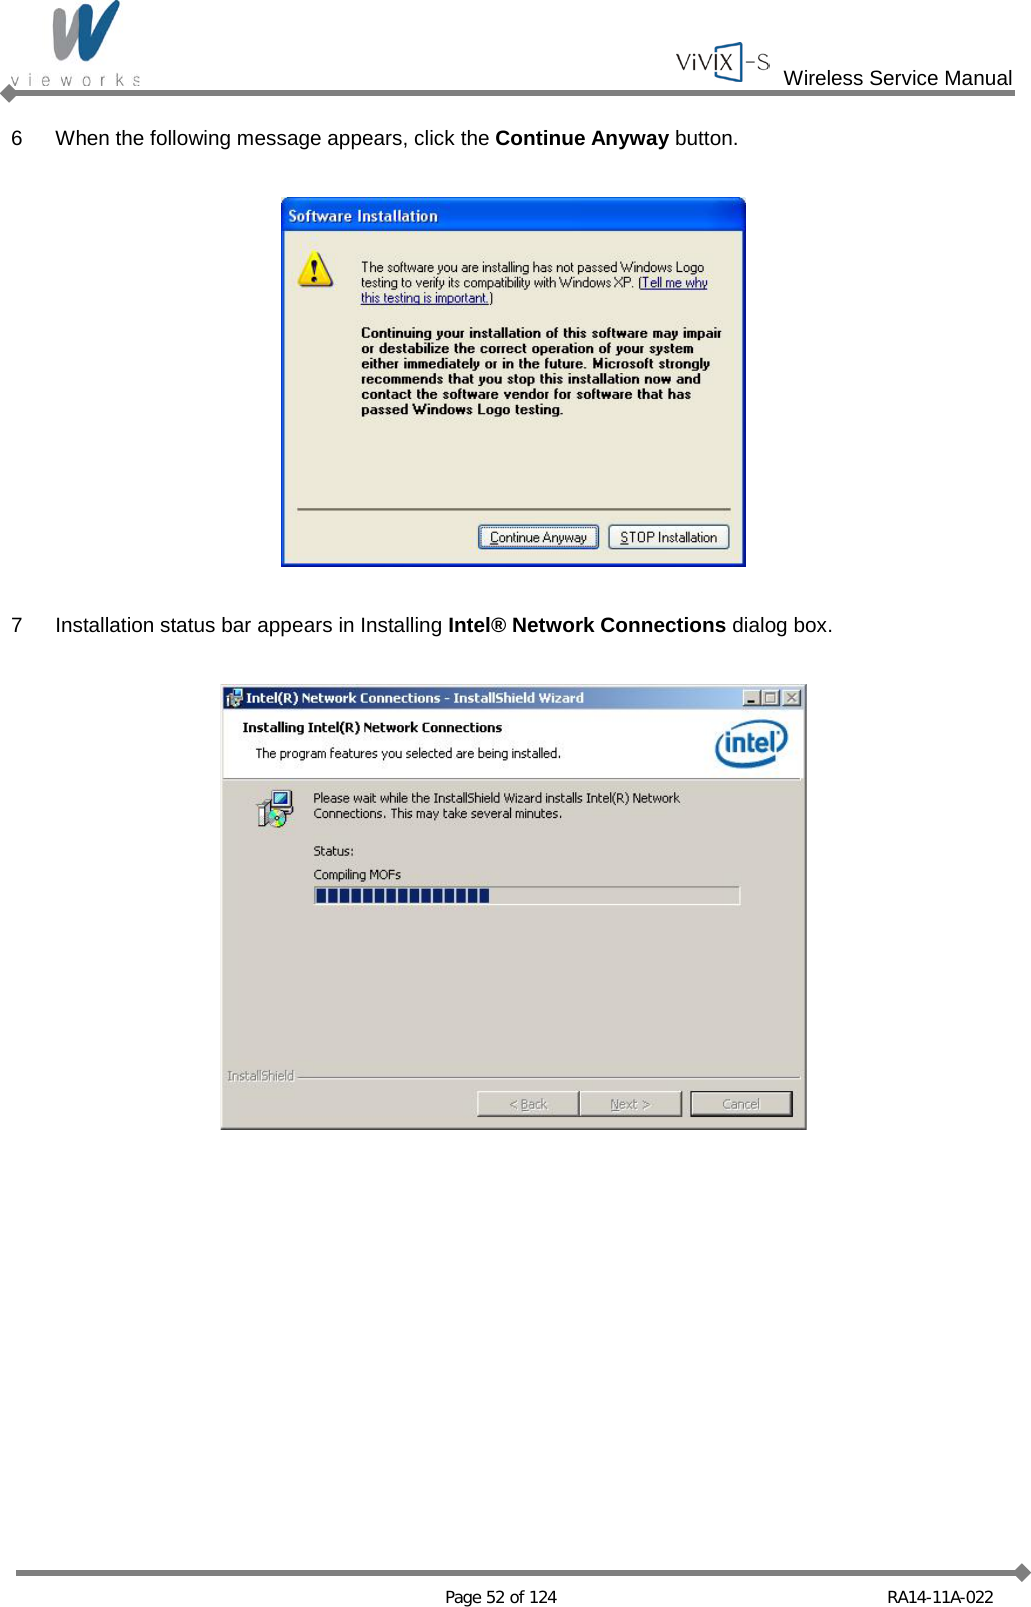  Wireless Service Manual   Page 52 of 124 RA14-11A-022 6  When the following message appears, click the Continue Anyway button.    7  Installation status bar appears in Installing Intel® Network Connections dialog box.    